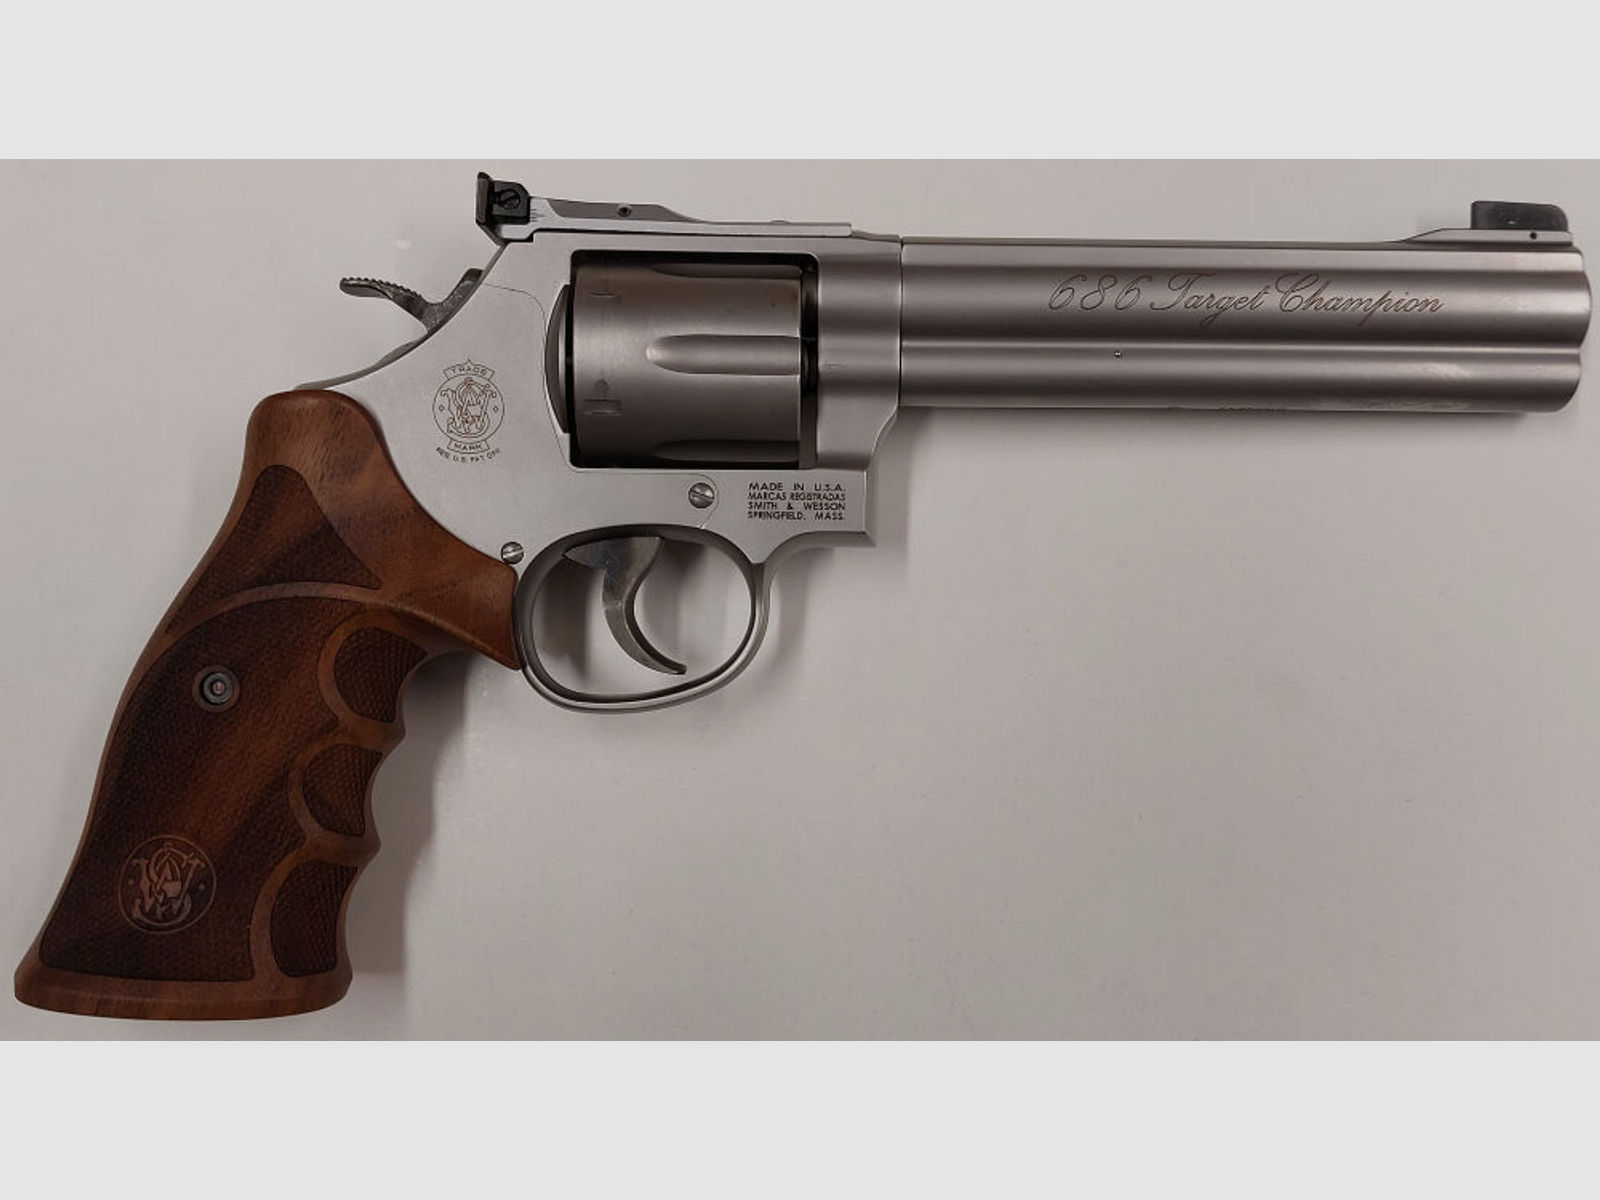 Smith & Wesson	 Sport-/Matchrevolver Smith & Wesson Mod.686-6 Target Champion Stainless Steel 6" im Kaliber .357Mag.